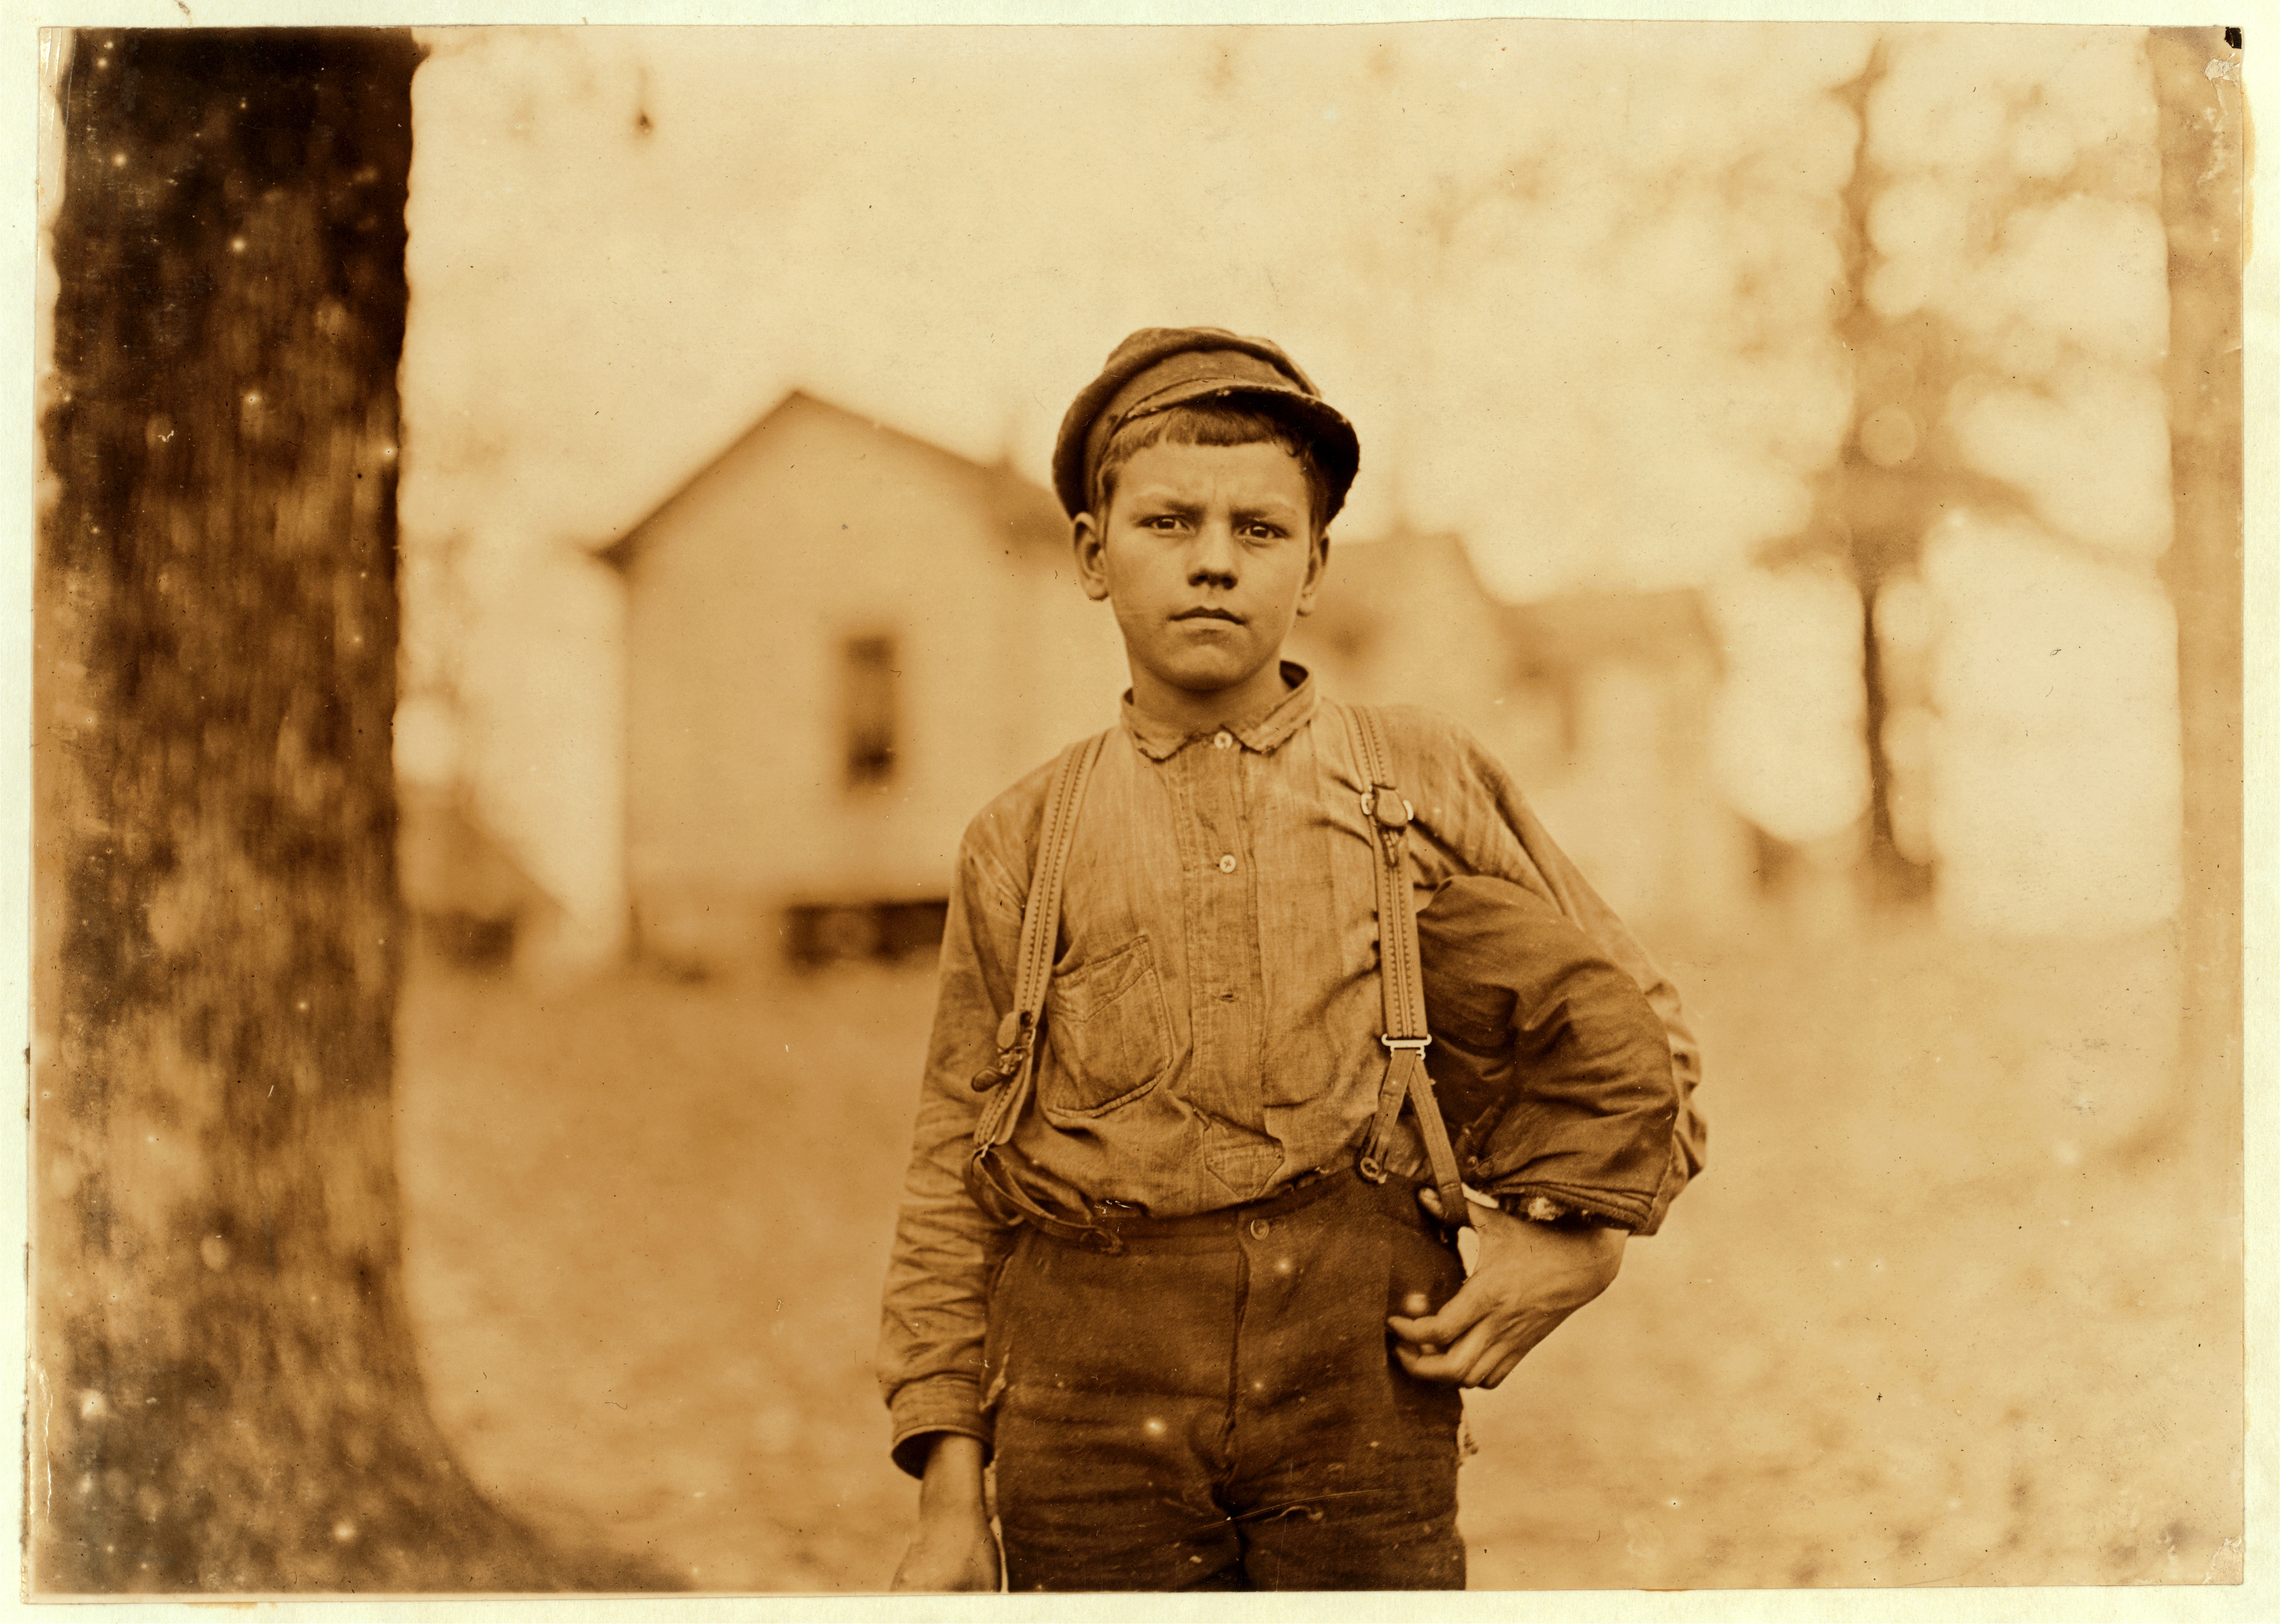 Lewis Hine, Archie Love, mill worker, 14 years old, Chester, South Carolina, 1908